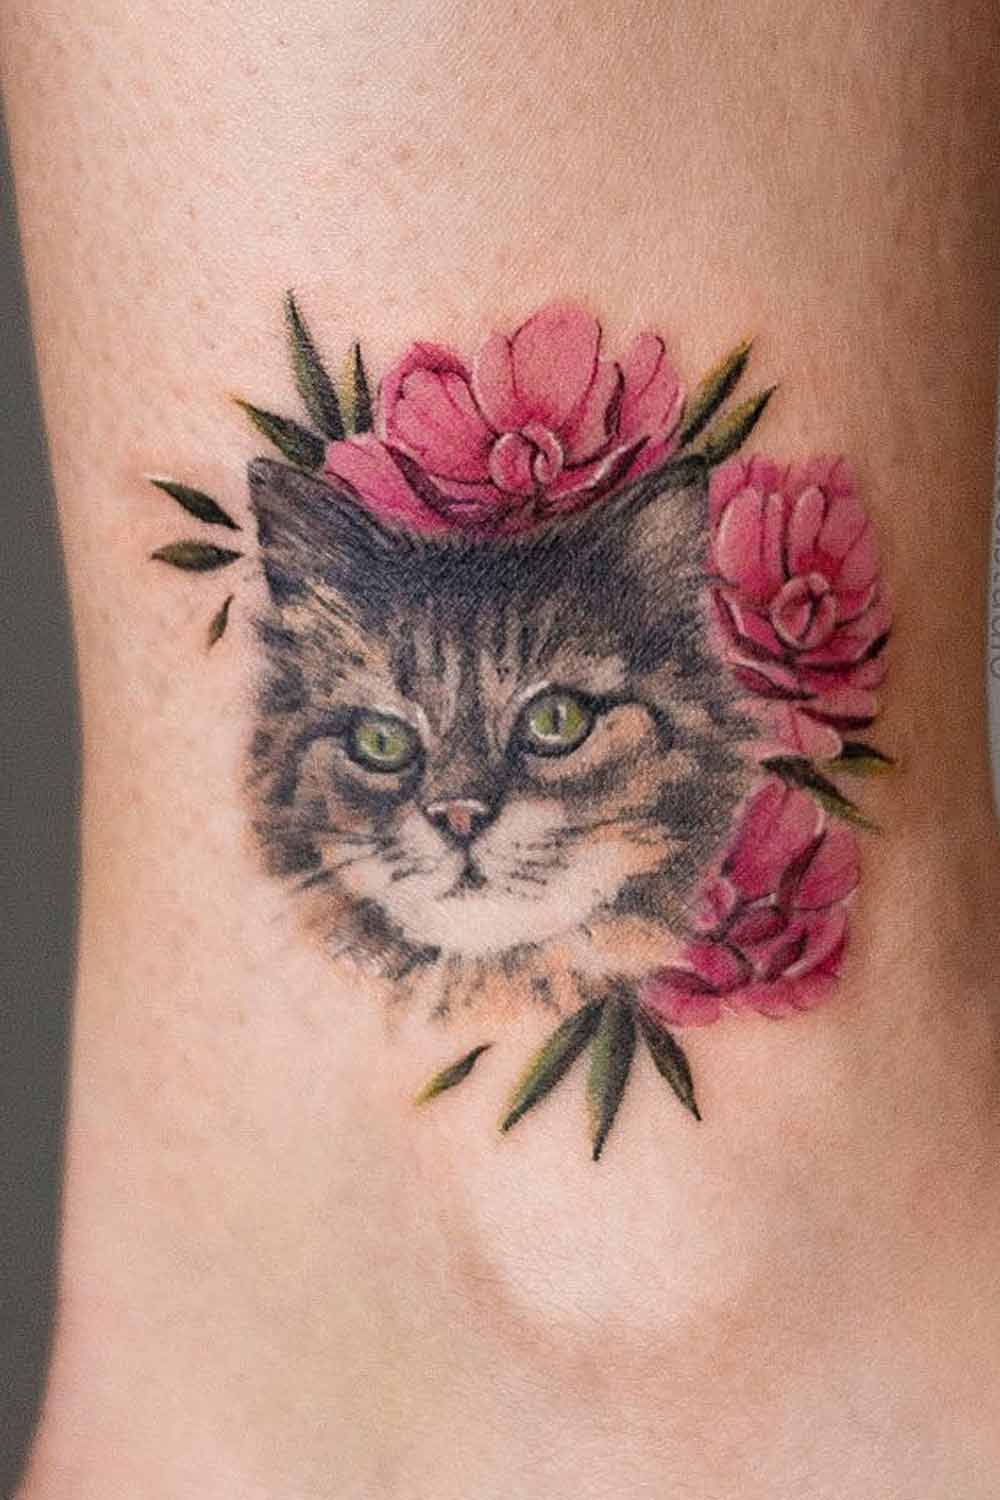 Realistic Cat Tattoo with Flowers Design